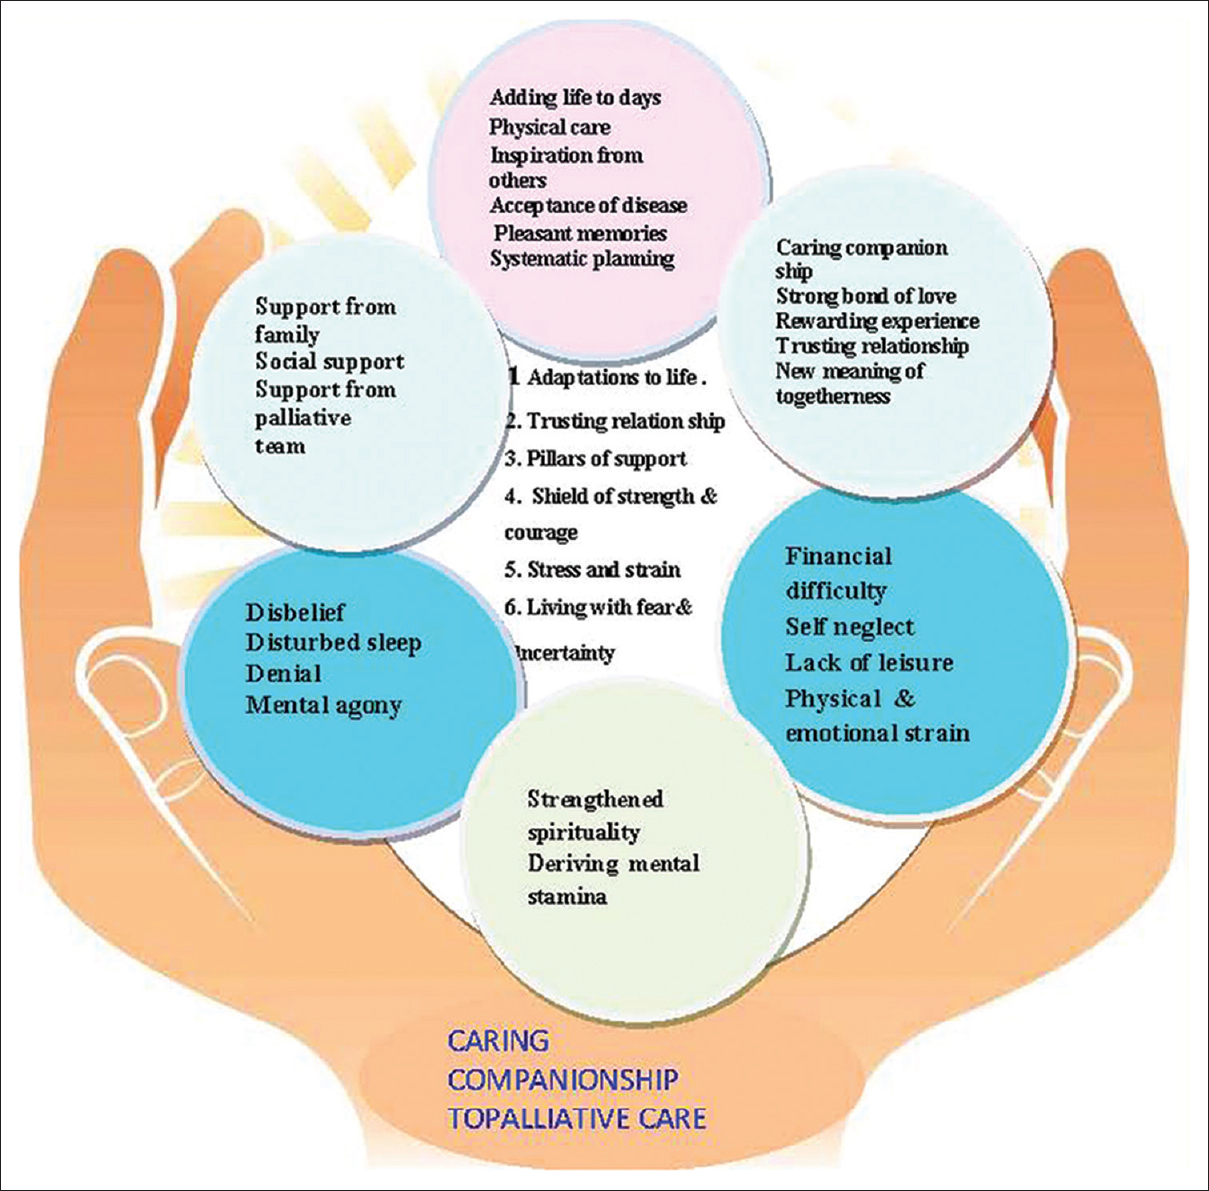 Conceptual model of the phenomenon of lived experiences of caregivers of cancer patients on palliative care